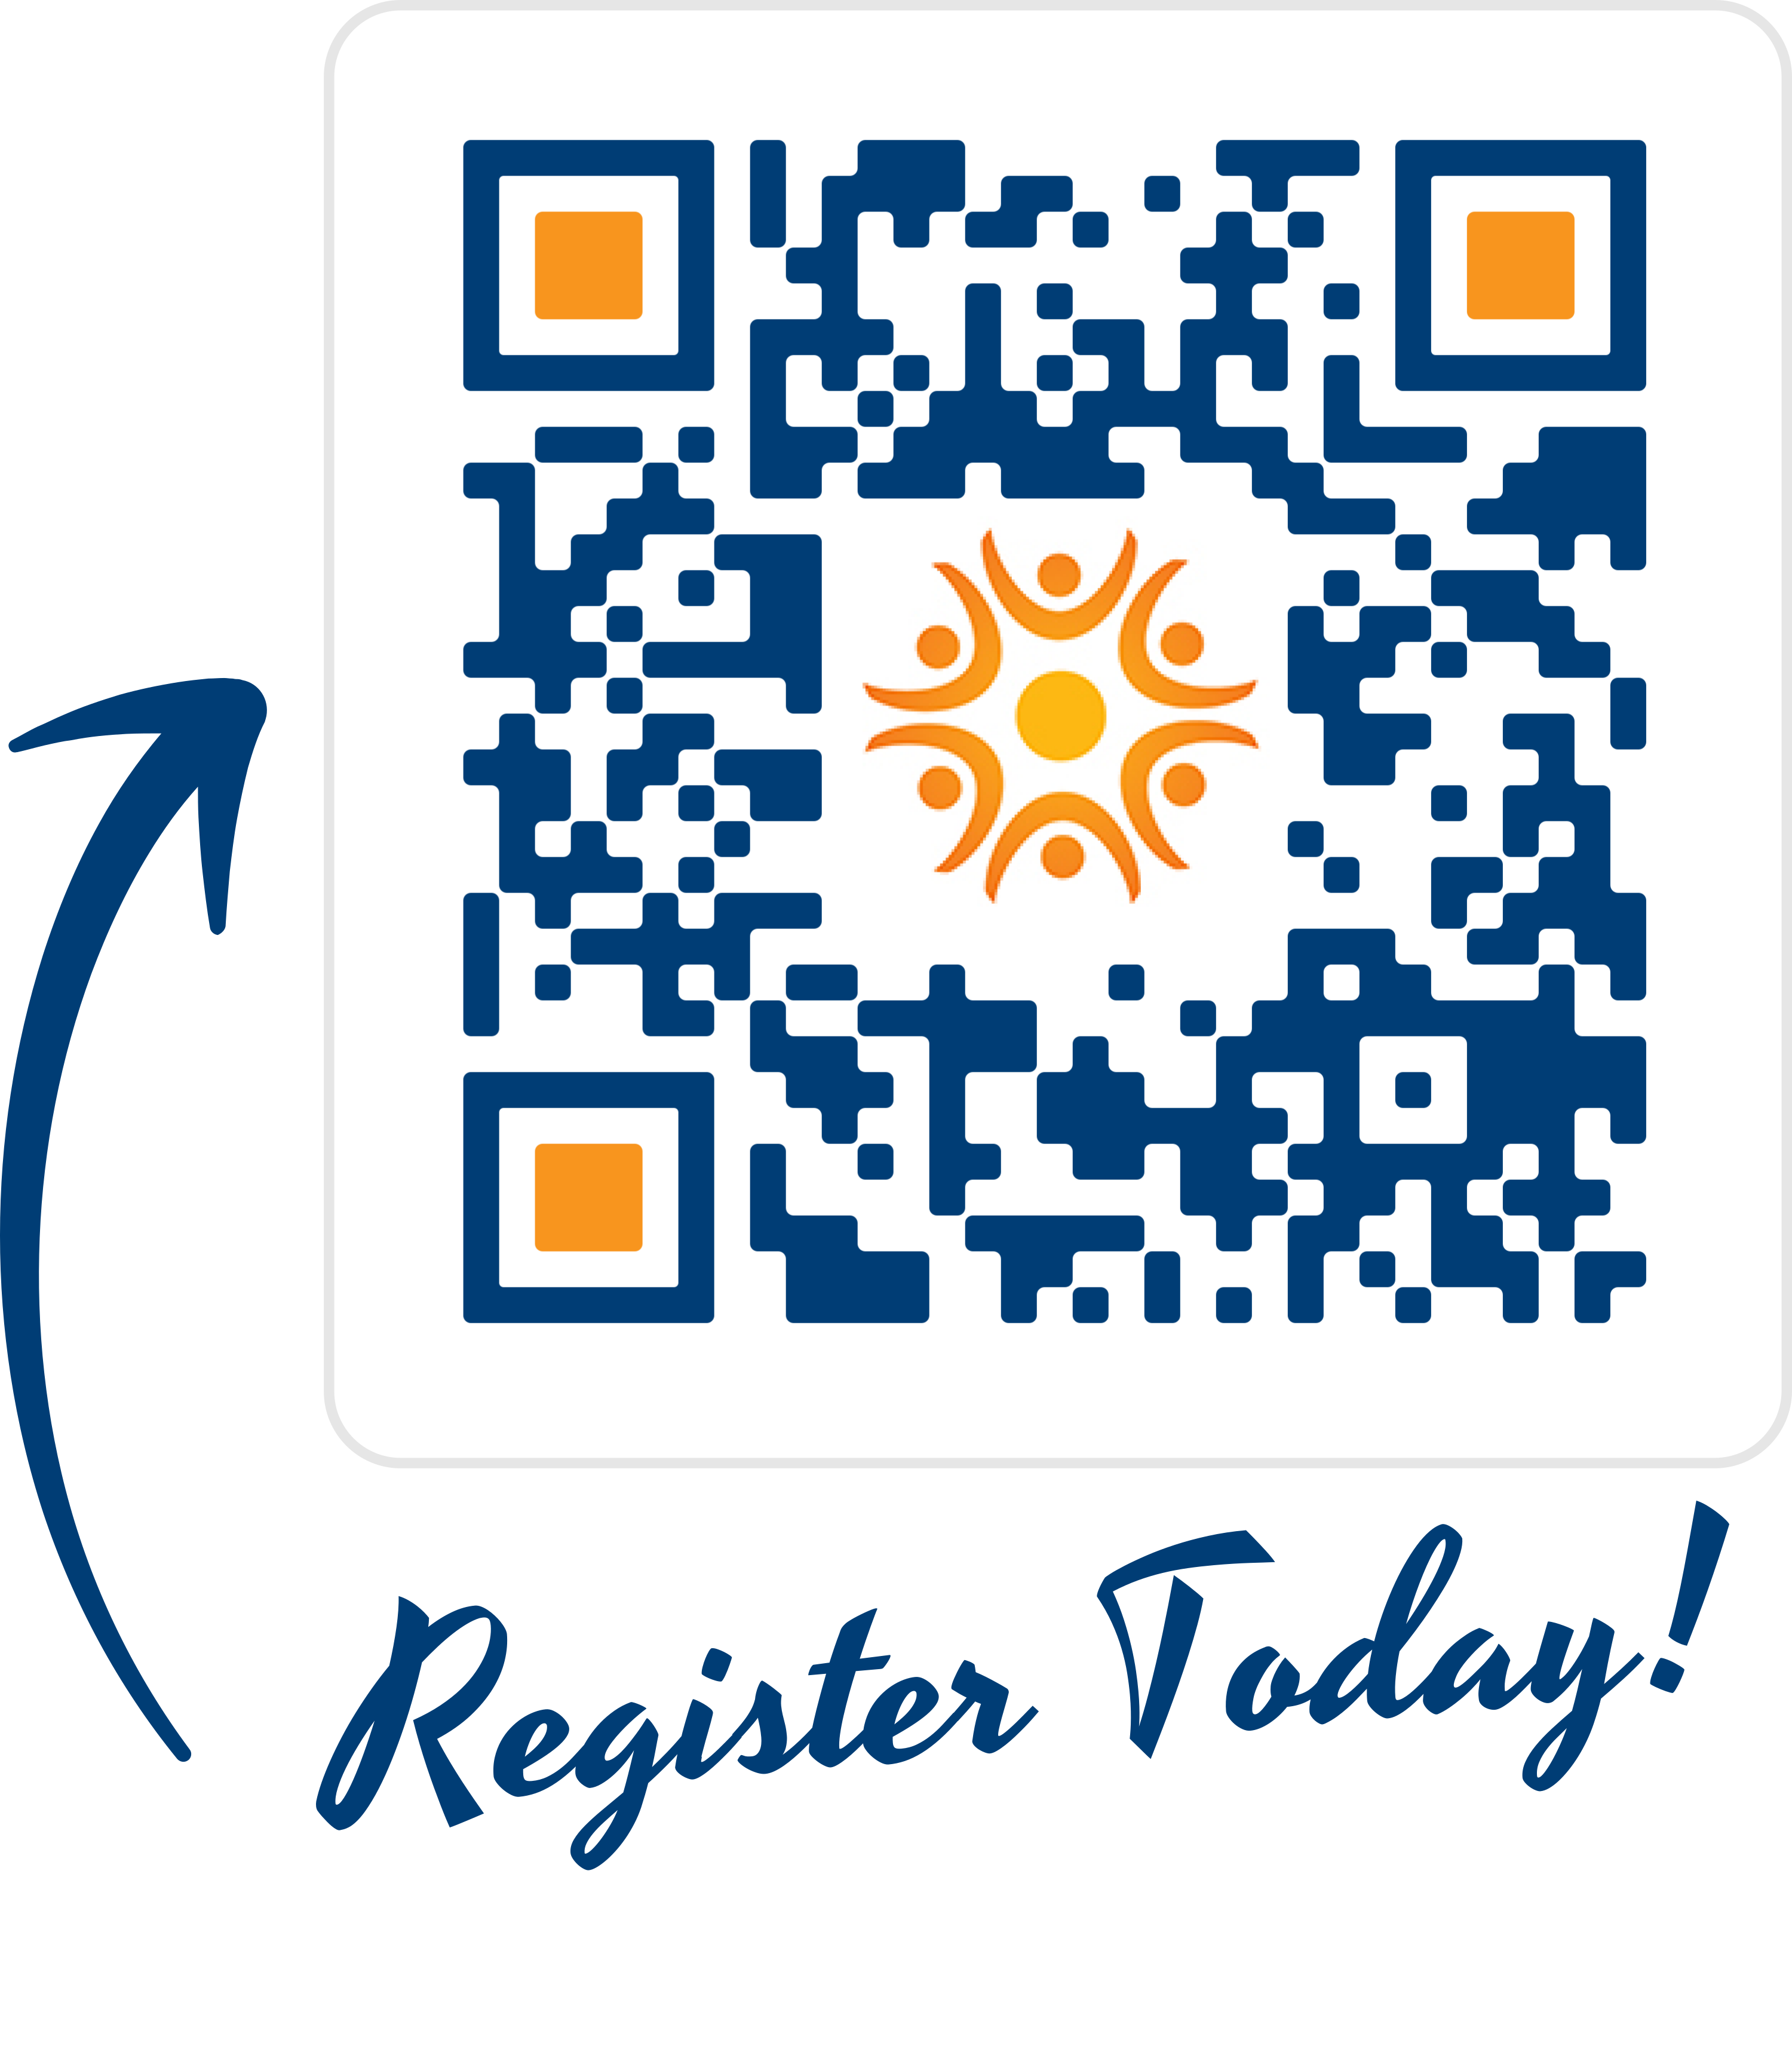 QR code to register for event